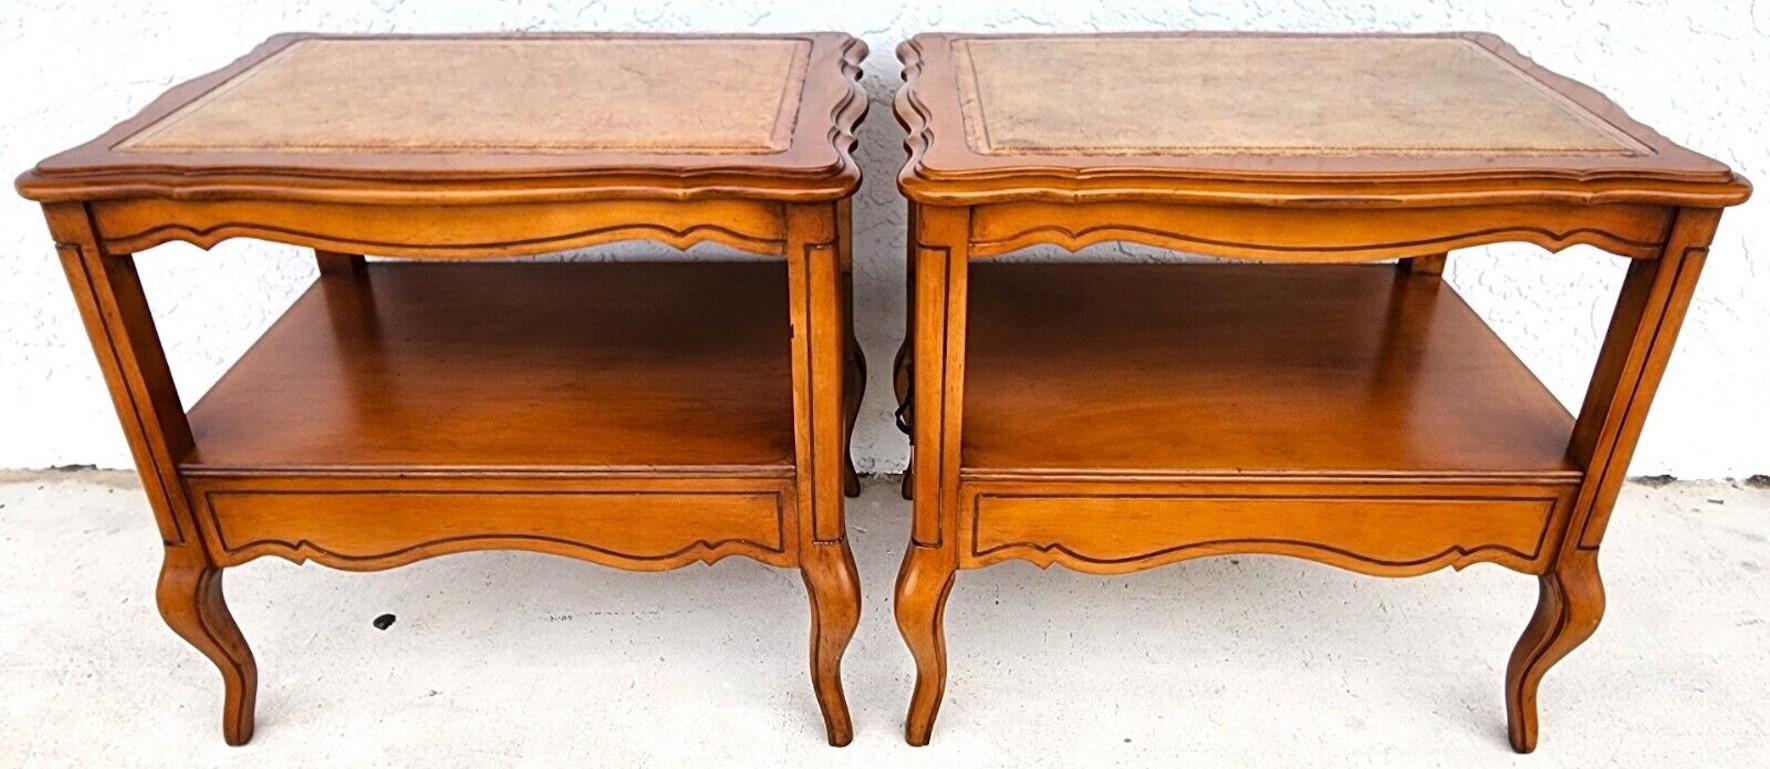 Vintage French Side Tables Walnut Leather Top by HAMMARY For Sale 3